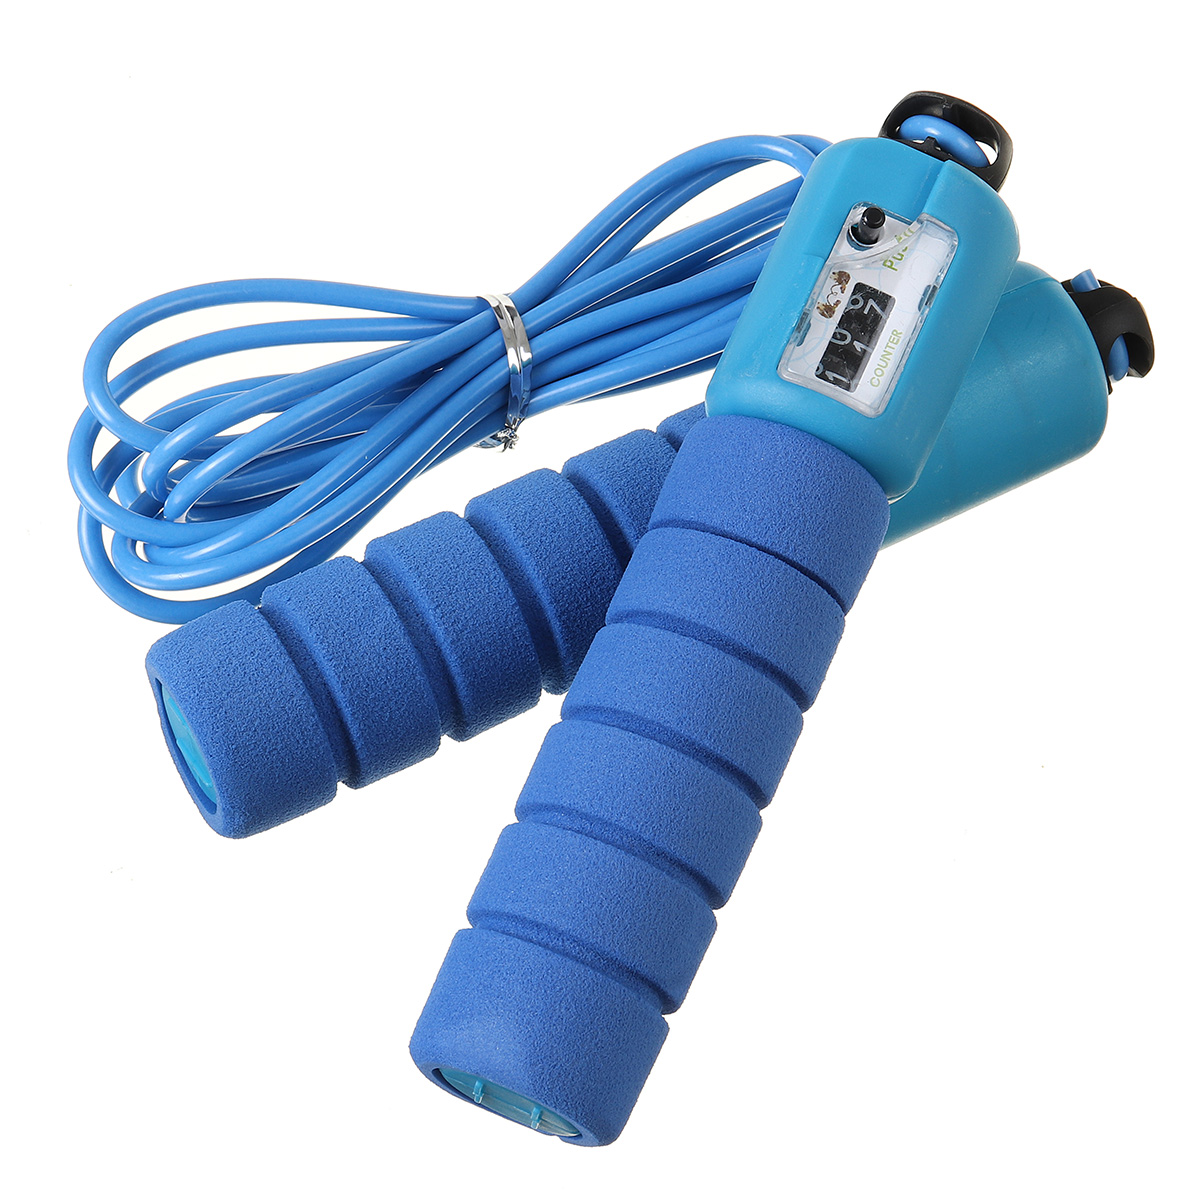 287cm-Rope-Jumping-Home-Adjustable-Speed-Training-Sport-Fitness-Skipping-Rope-1678695-3